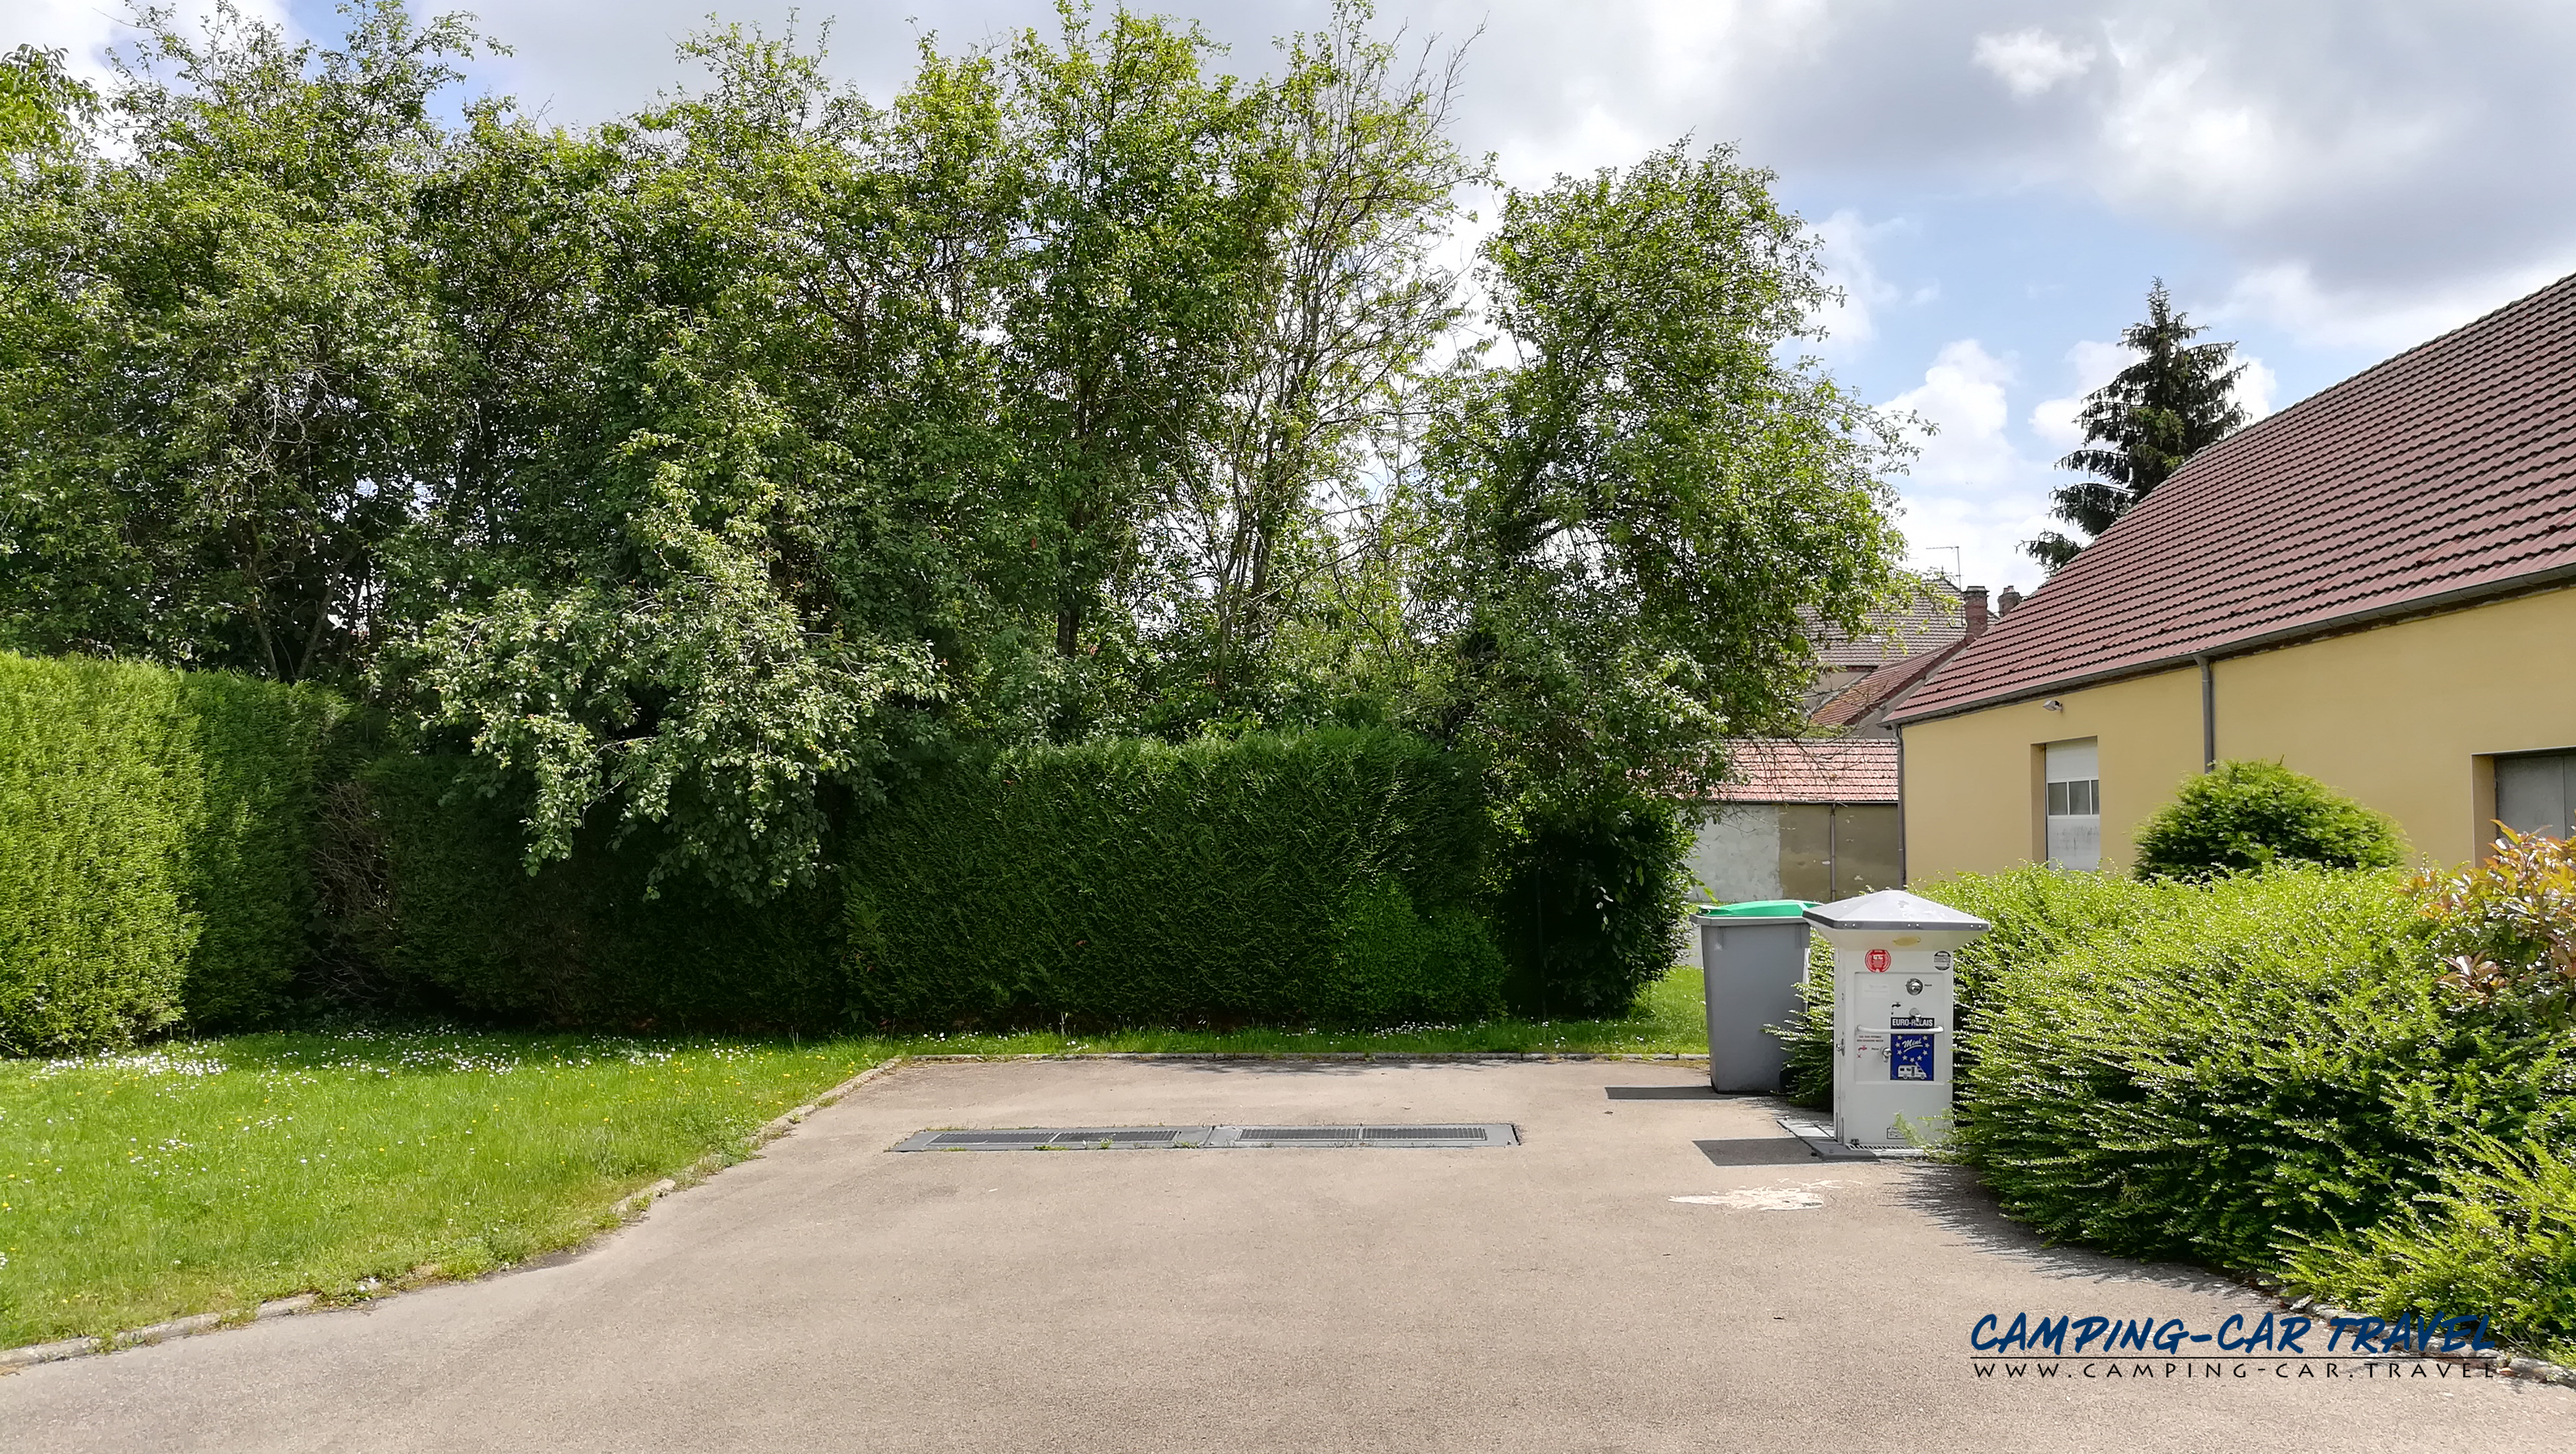 aire services camping car gault soigny marne